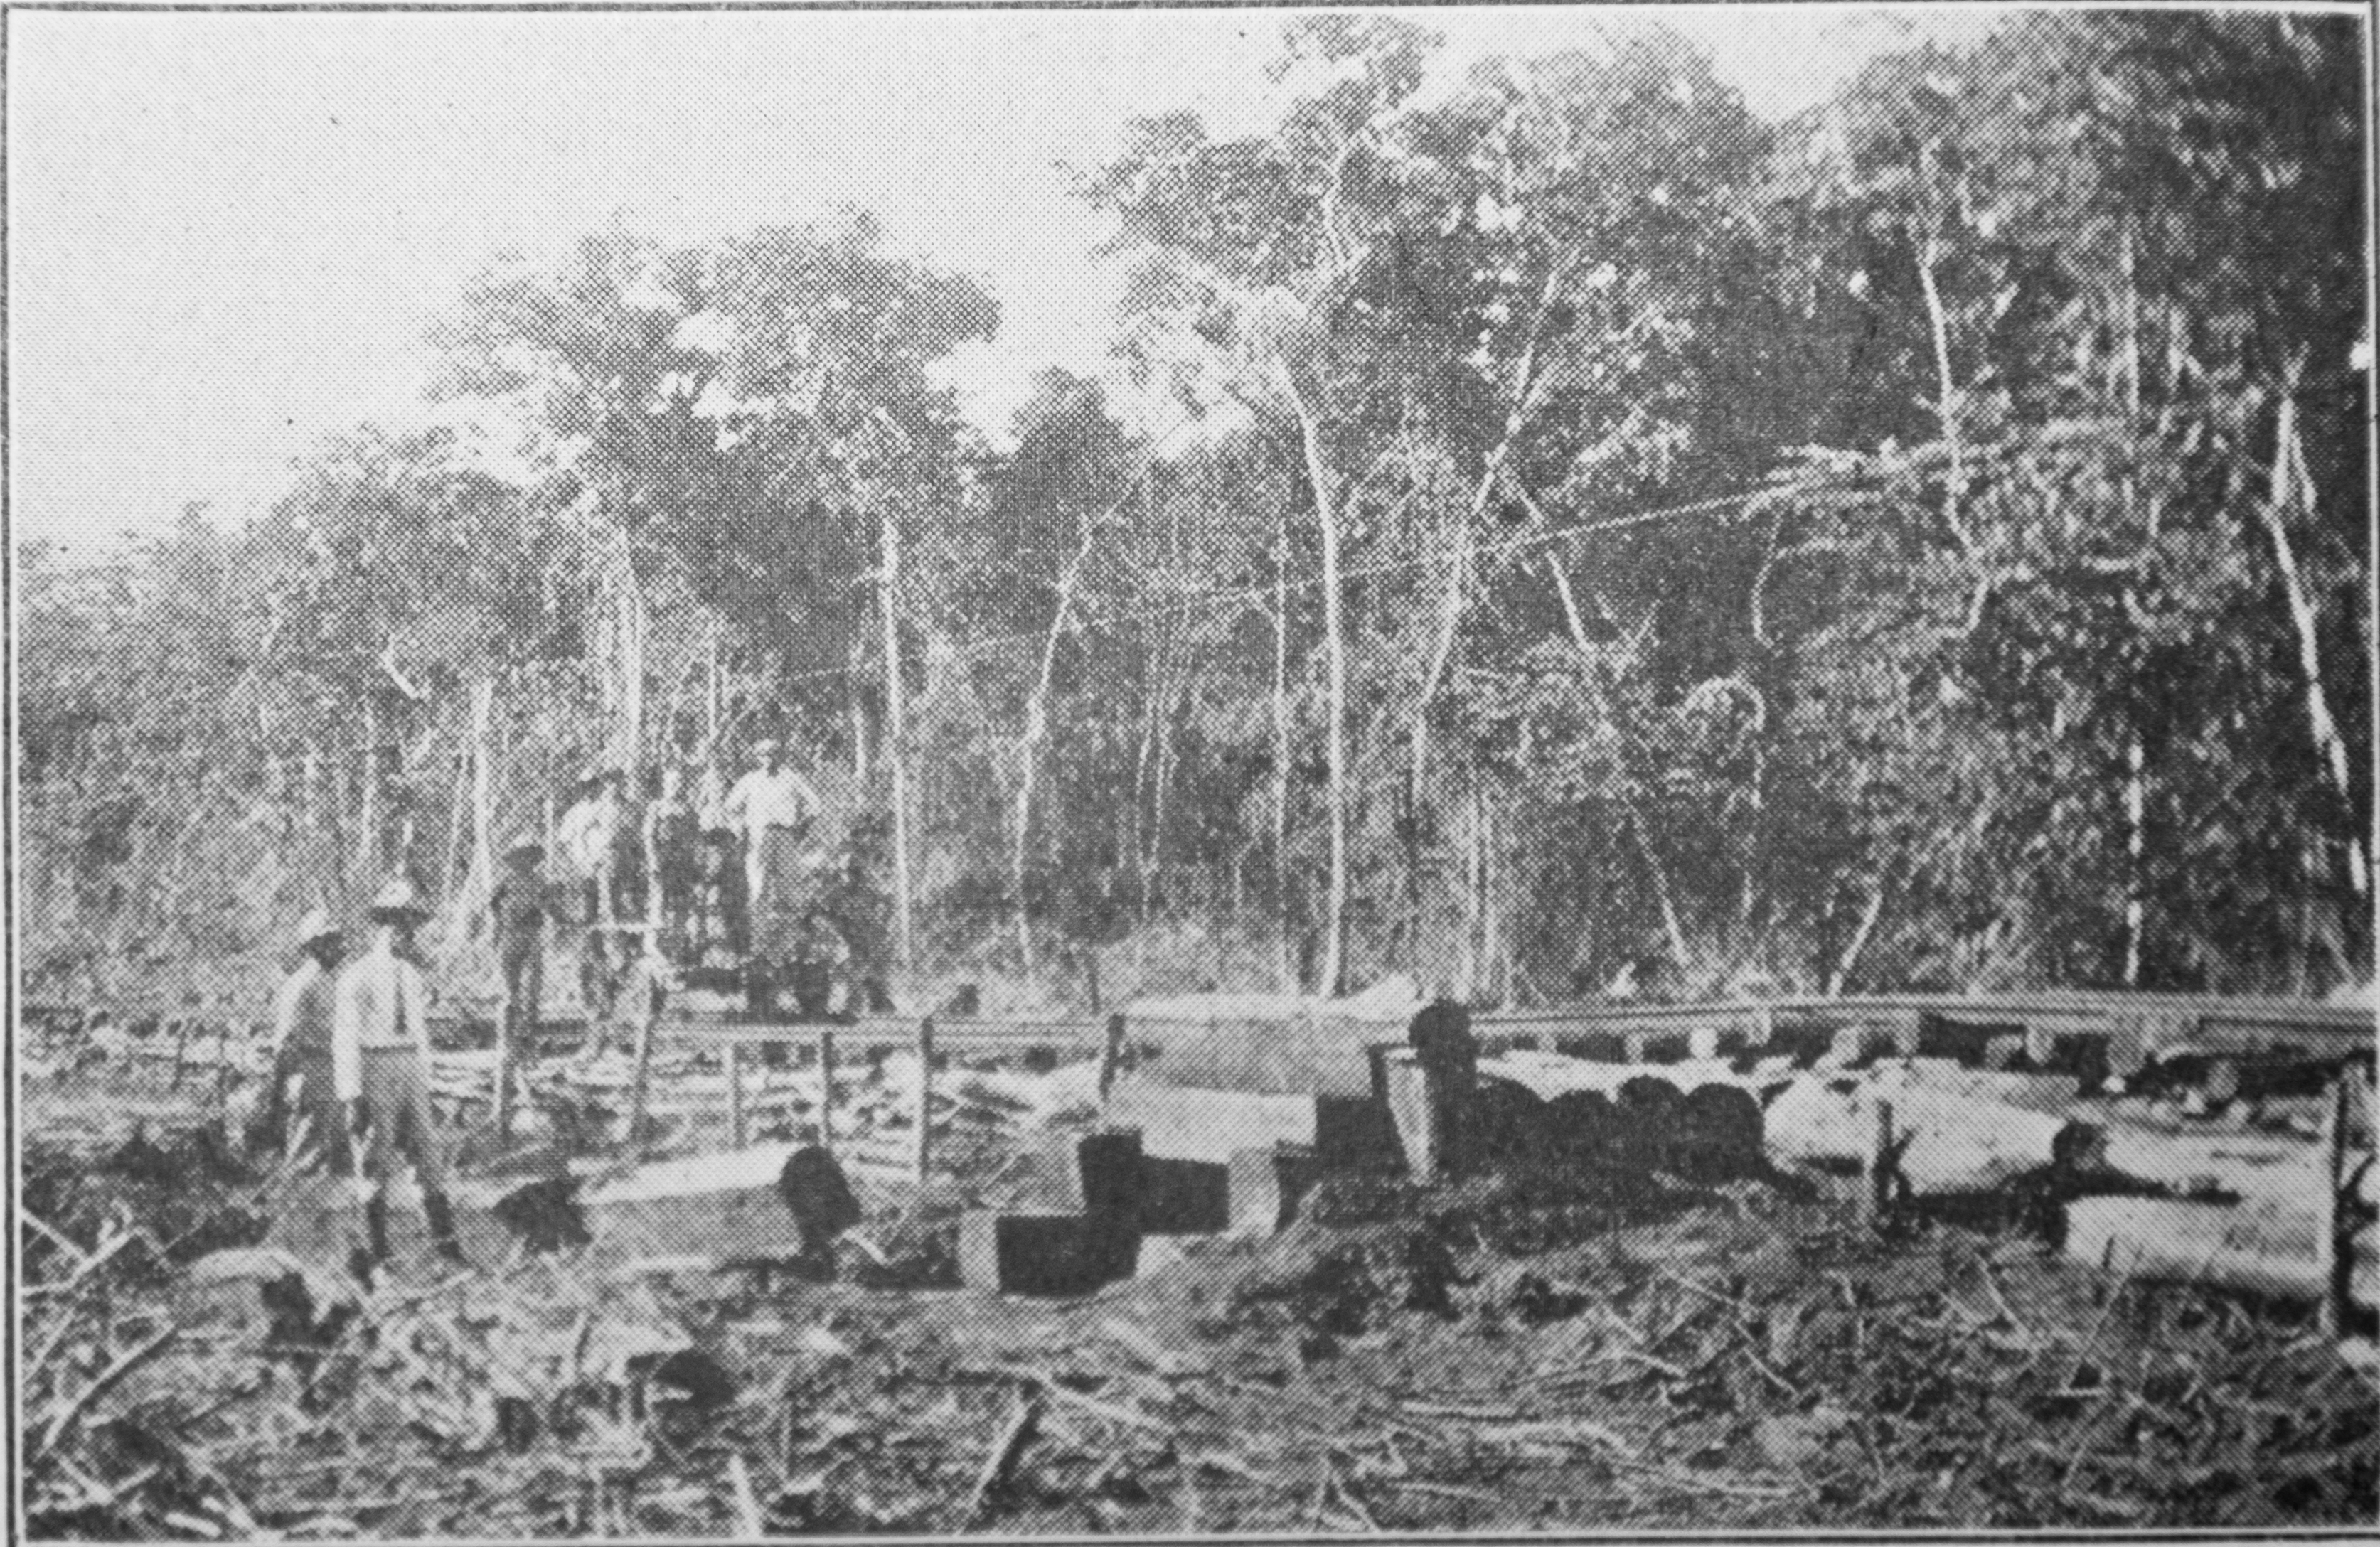 Mahogany Was Largely Used for Box Culvert Construction